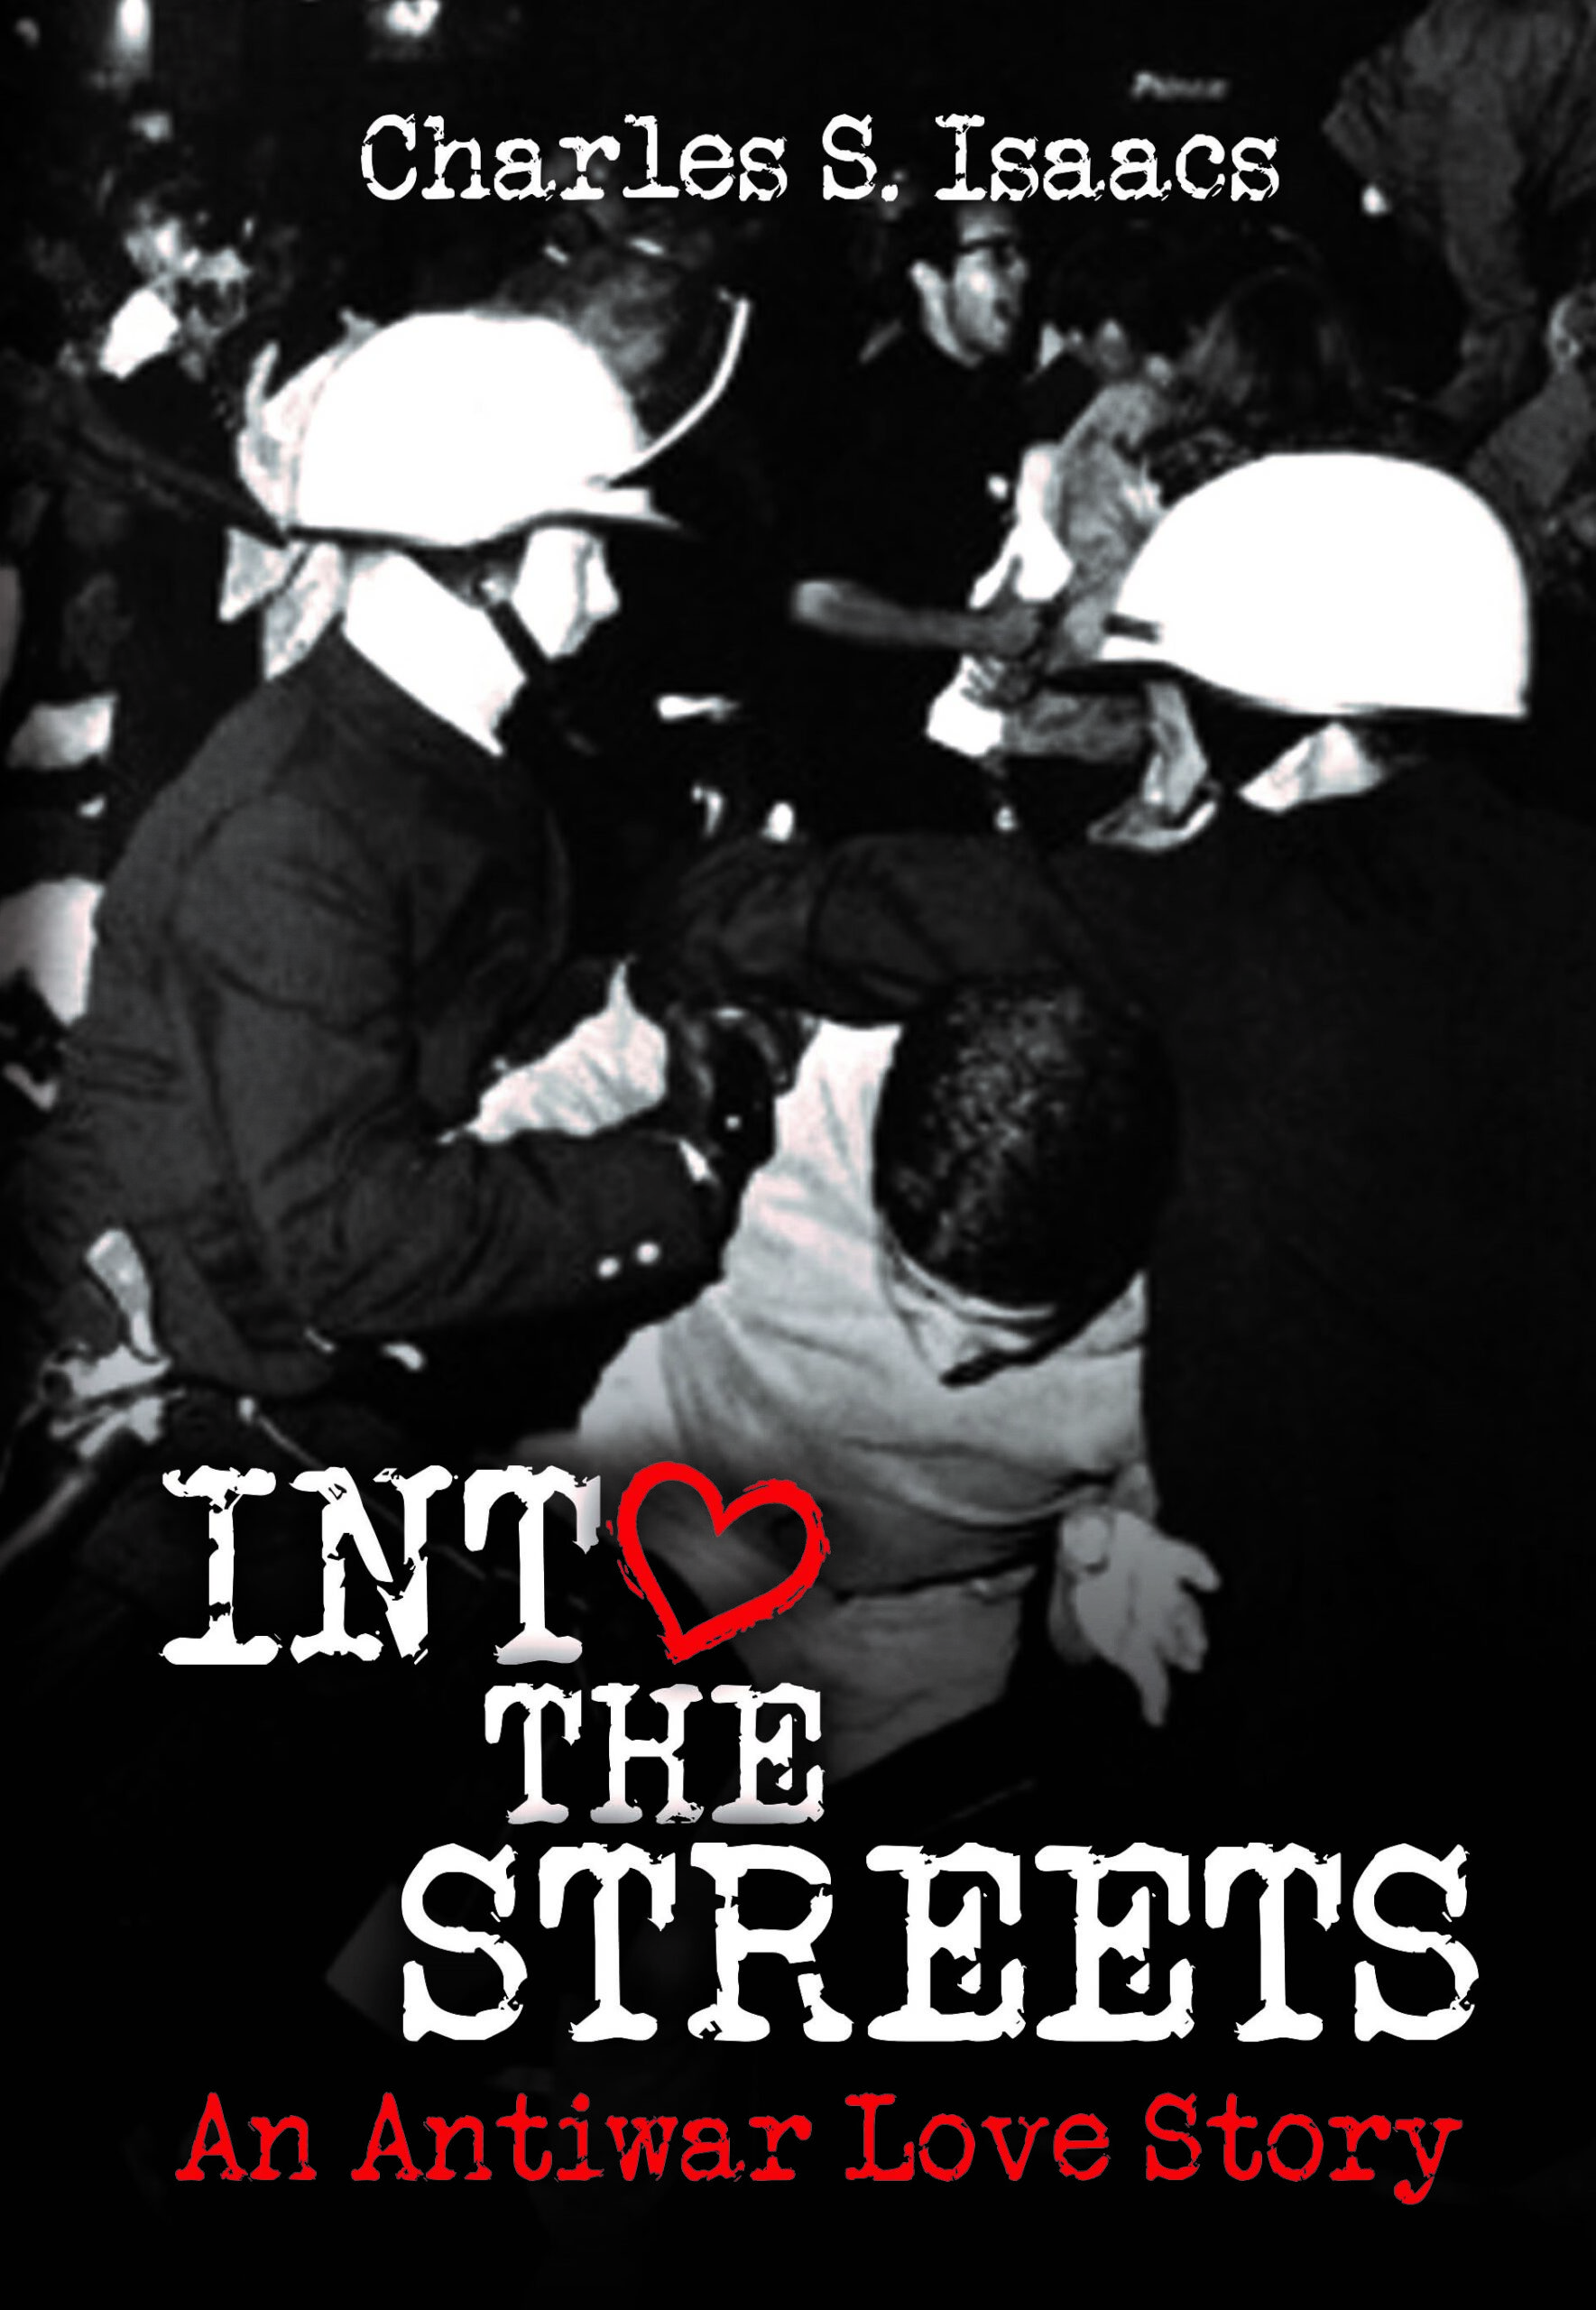 FREE: INTO THE STREETS: An Antiwar Love Story by Charles S. Isaacs